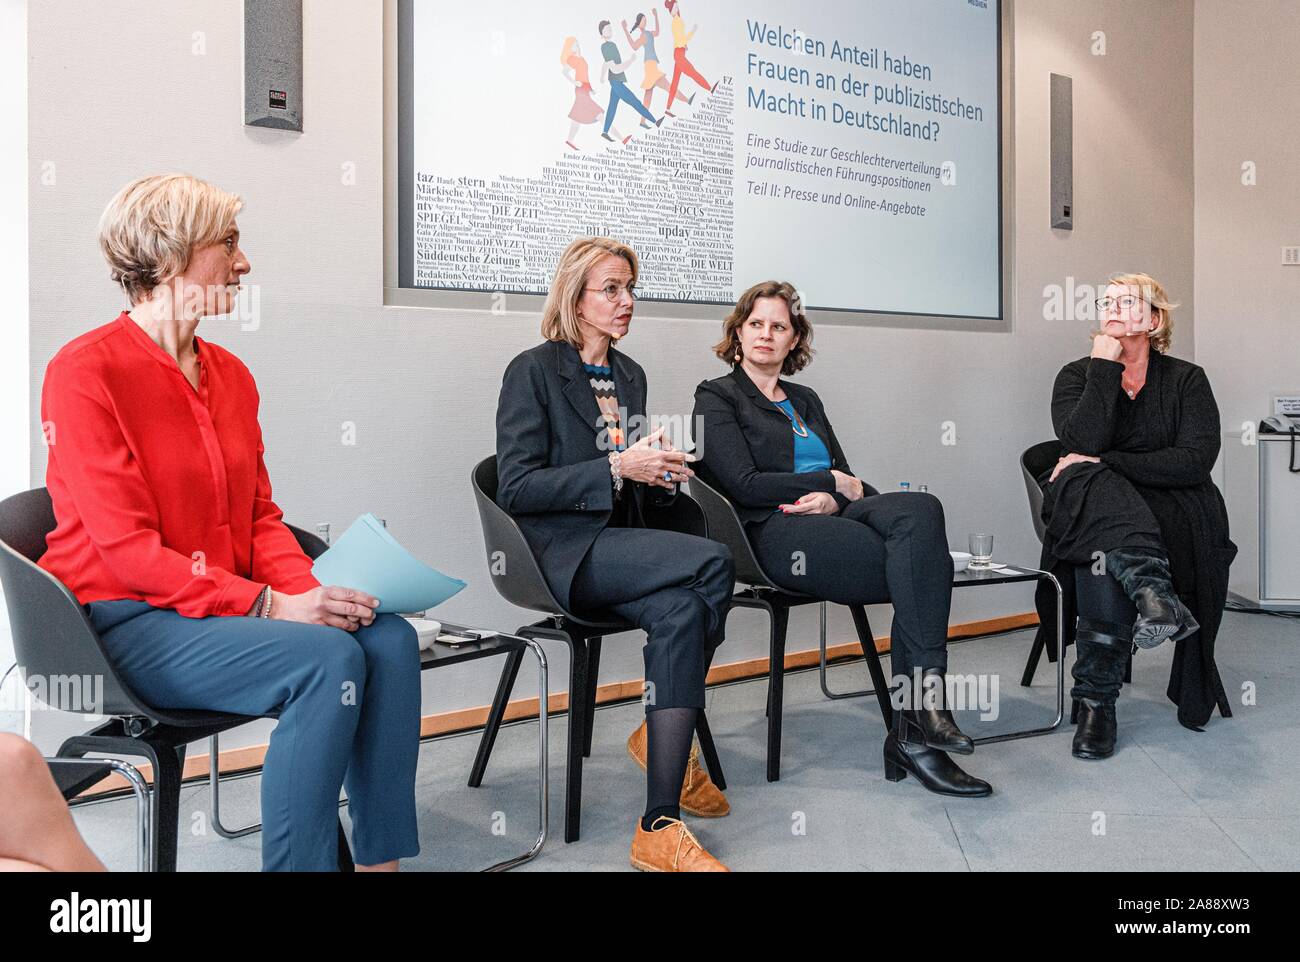 07 November 2019, Hamburg: Susanne Stichler (l-r), ARD presenter, Julia Jäkel, CEO of Gruner+Jahr, Juliane Seifert (SPD), State Secretary at the Federal Ministry for Family Affairs, Senior Citizens, Women and Youth, and Marion Horn, editor-in-chief of 'Bild am Sonntag', discuss the results of a study on gender distribution in leading journalistic positions of the ProQuote association. Photo: Markus Scholz/dpa Stock Photo